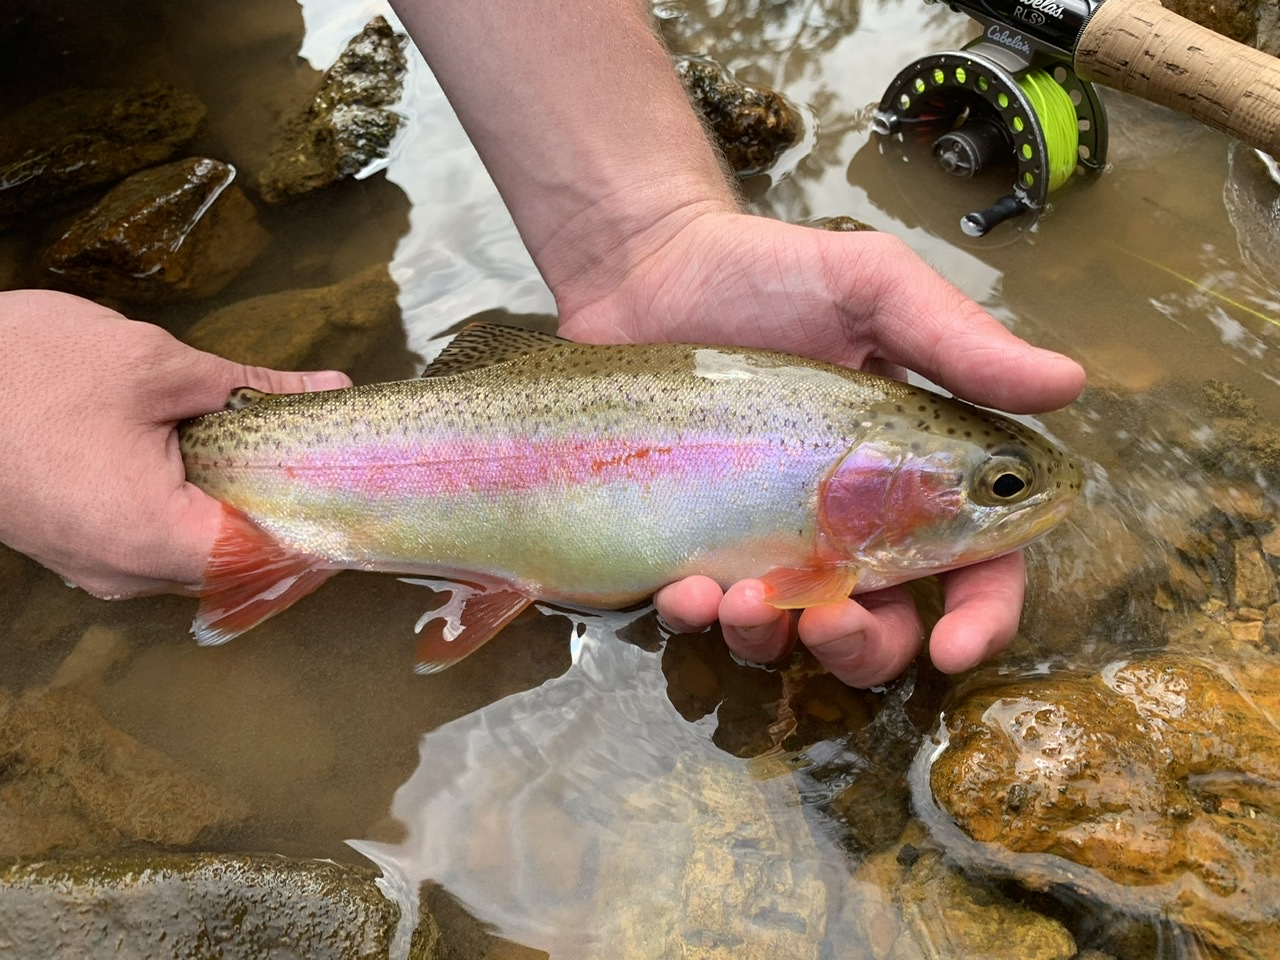 Spectacular rainbow trout caught in the Eleven Point River